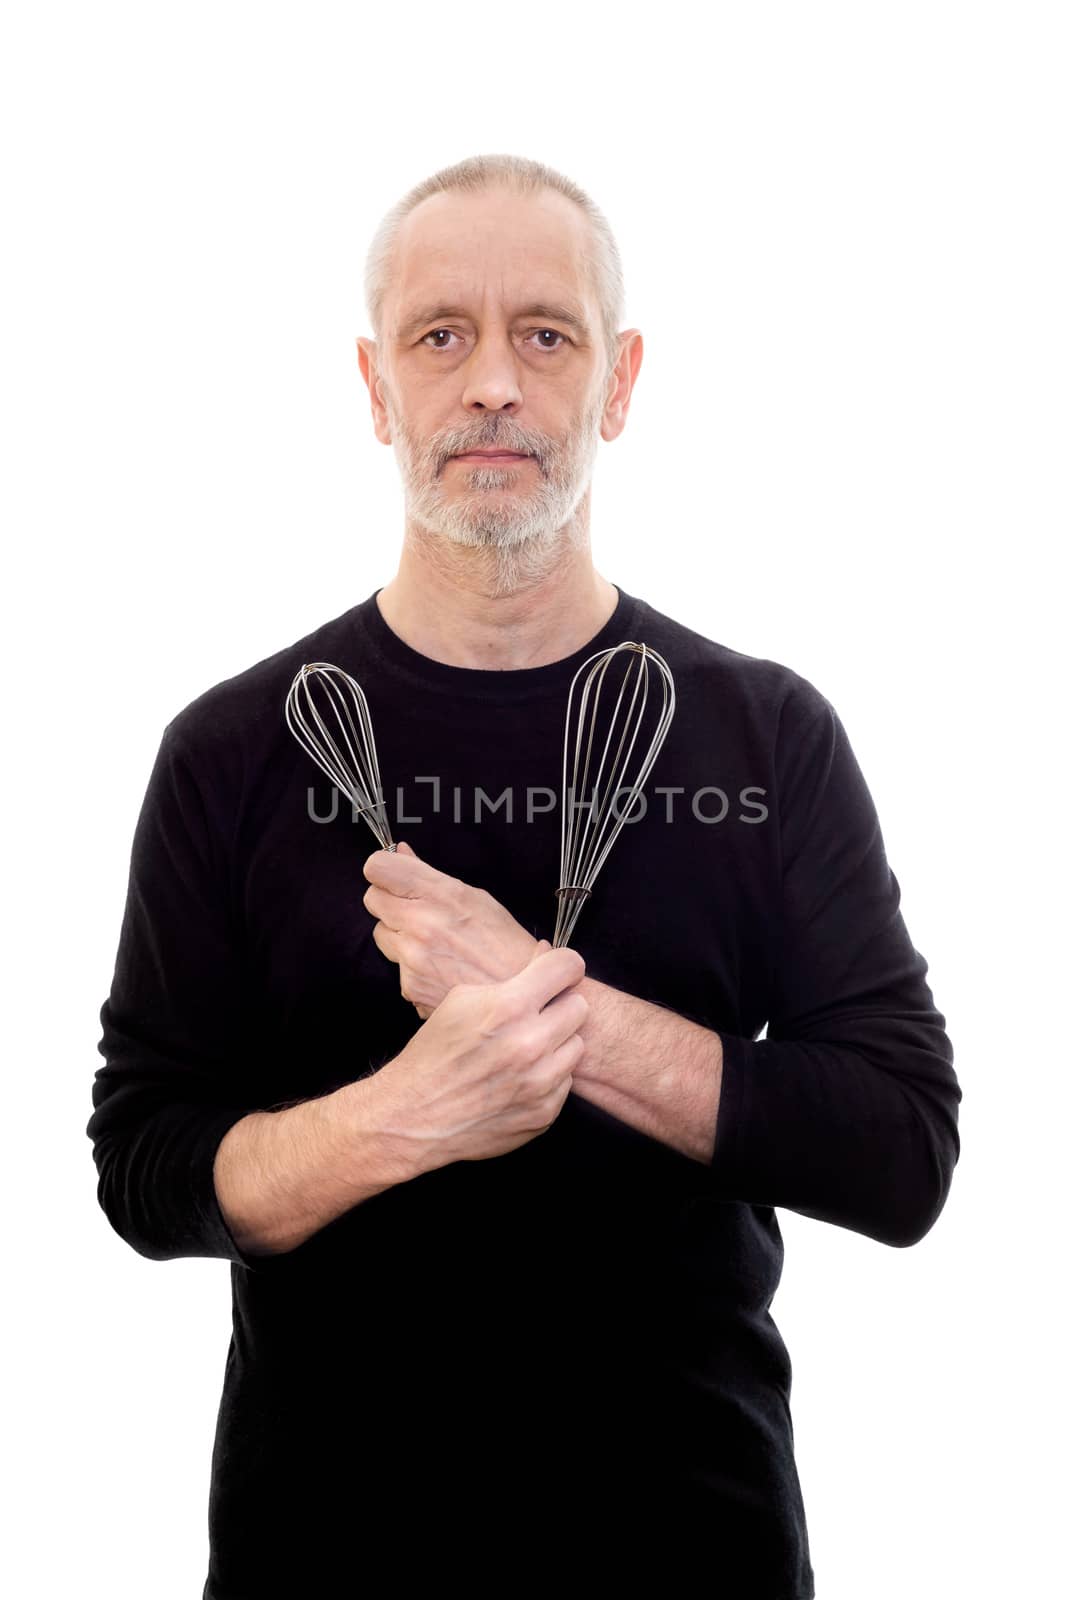 Adult man in black holds a whip in each hand and looks serious